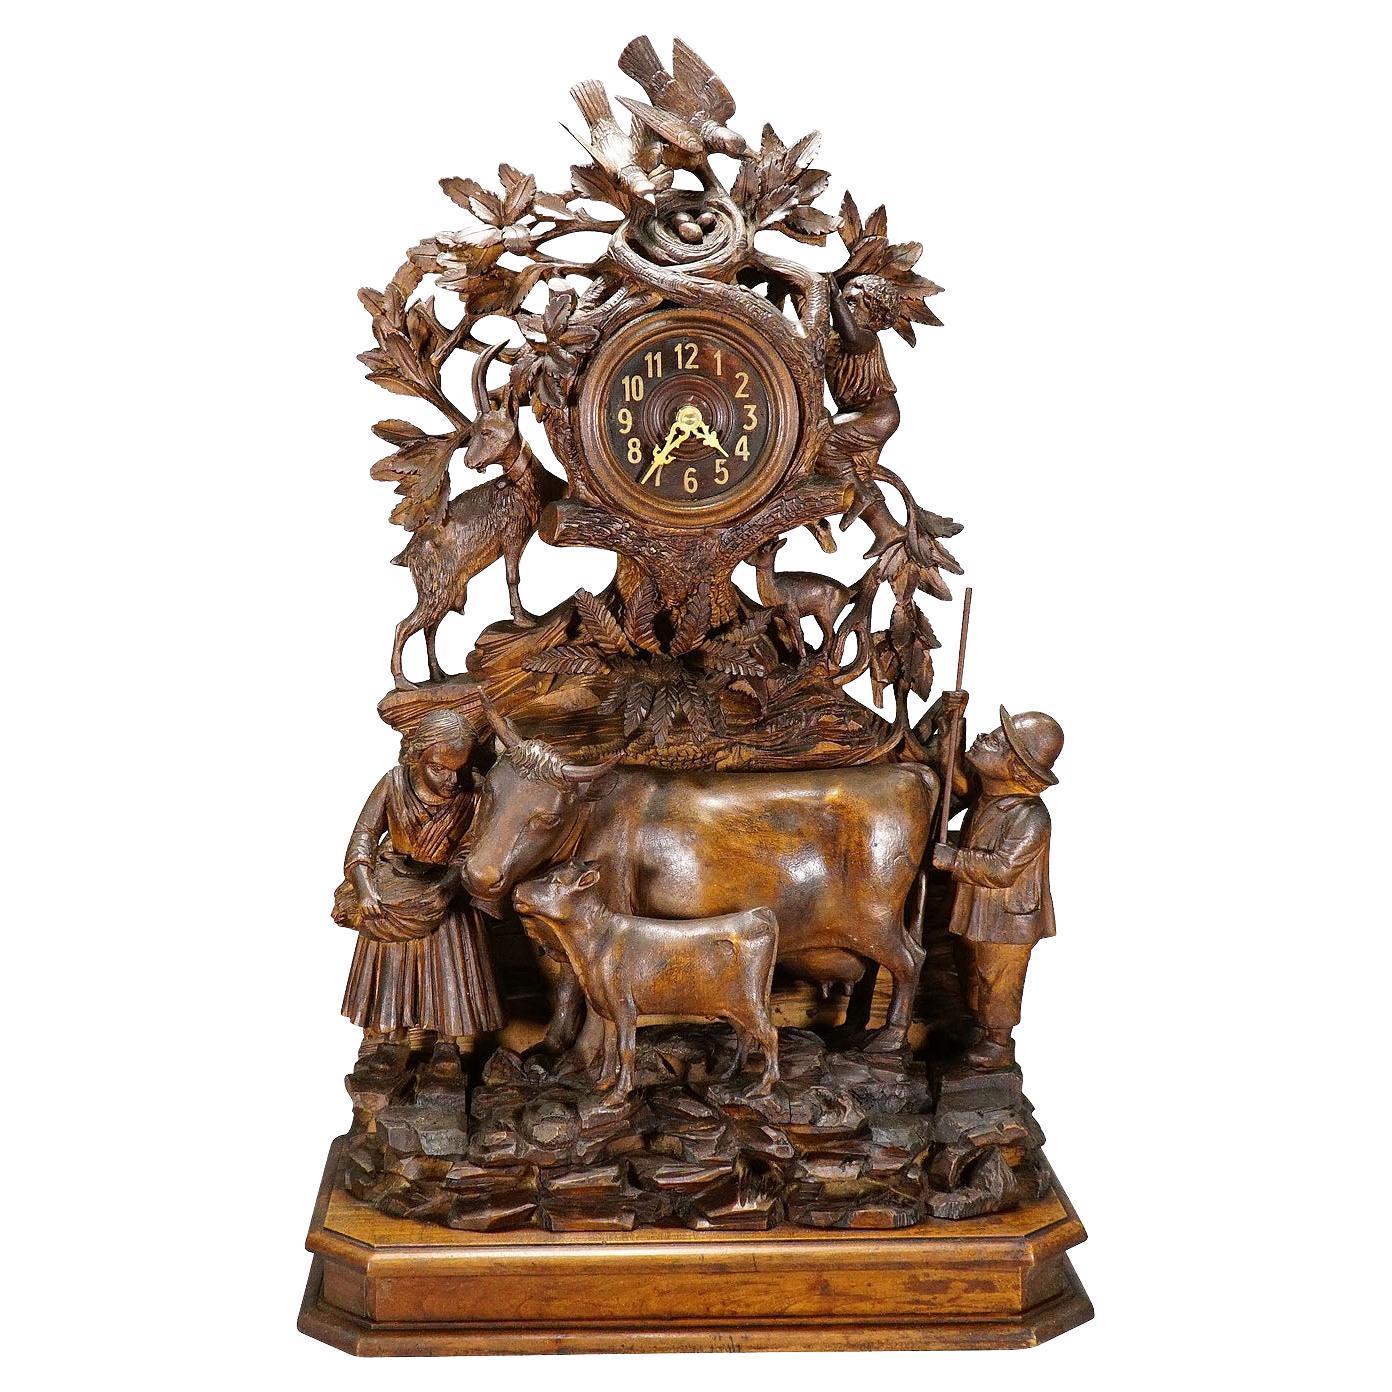 Antique Mantel Clock with Herdsman Family, Goats and Cattle For Sale